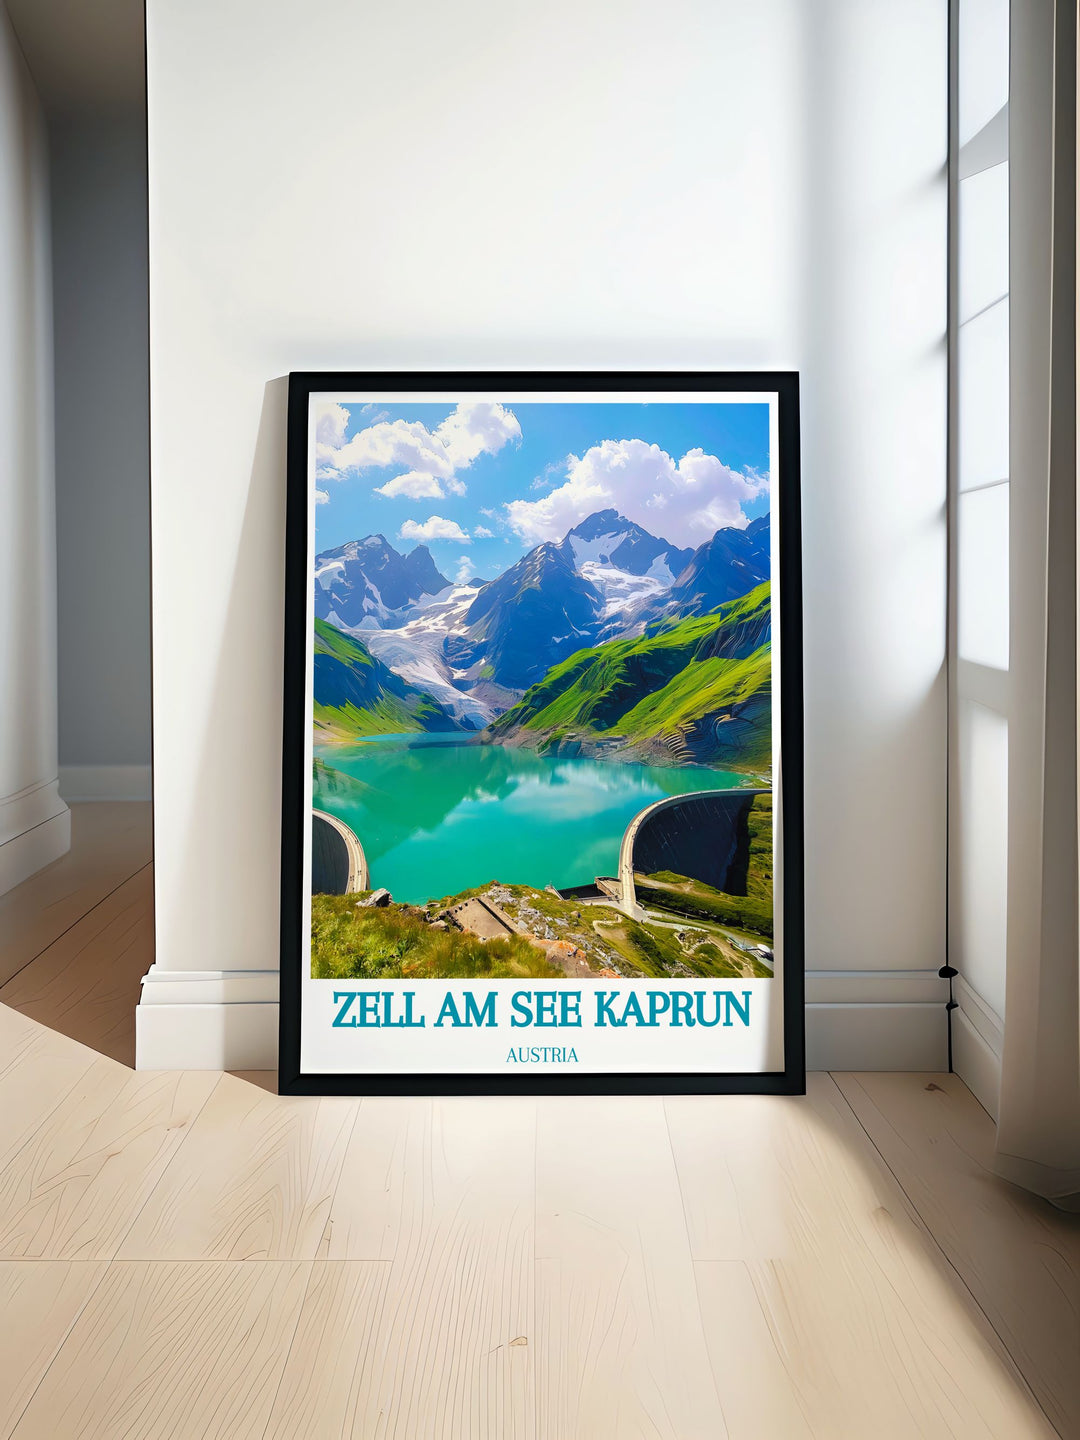 A stunning fine art print showcasing the breathtaking scenery of Zell am See Kaprun, Austria. The artwork captures the snow capped peaks, serene lake, and charming village, making it a perfect piece for those who love the beauty and tranquility of the Alps.